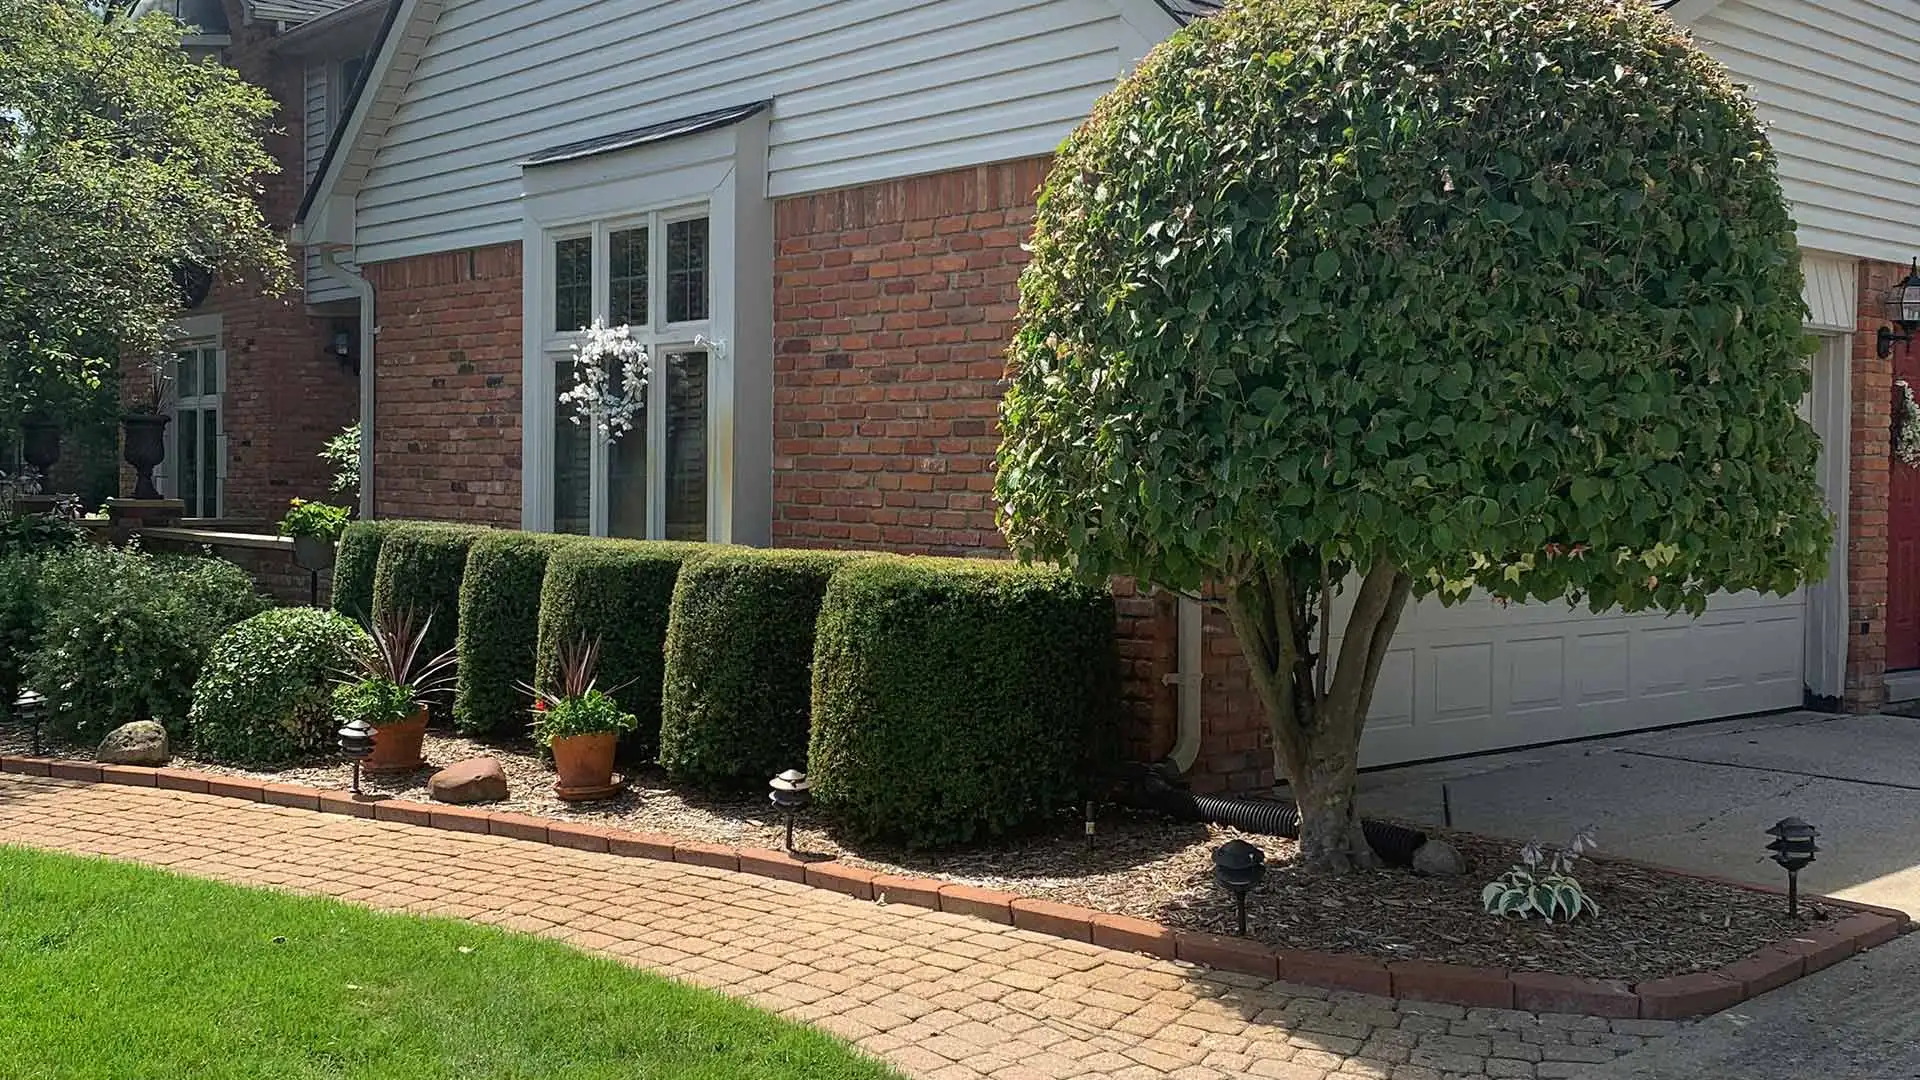 Home in Shelby, MI with landscape bed and trimmed shrubs.